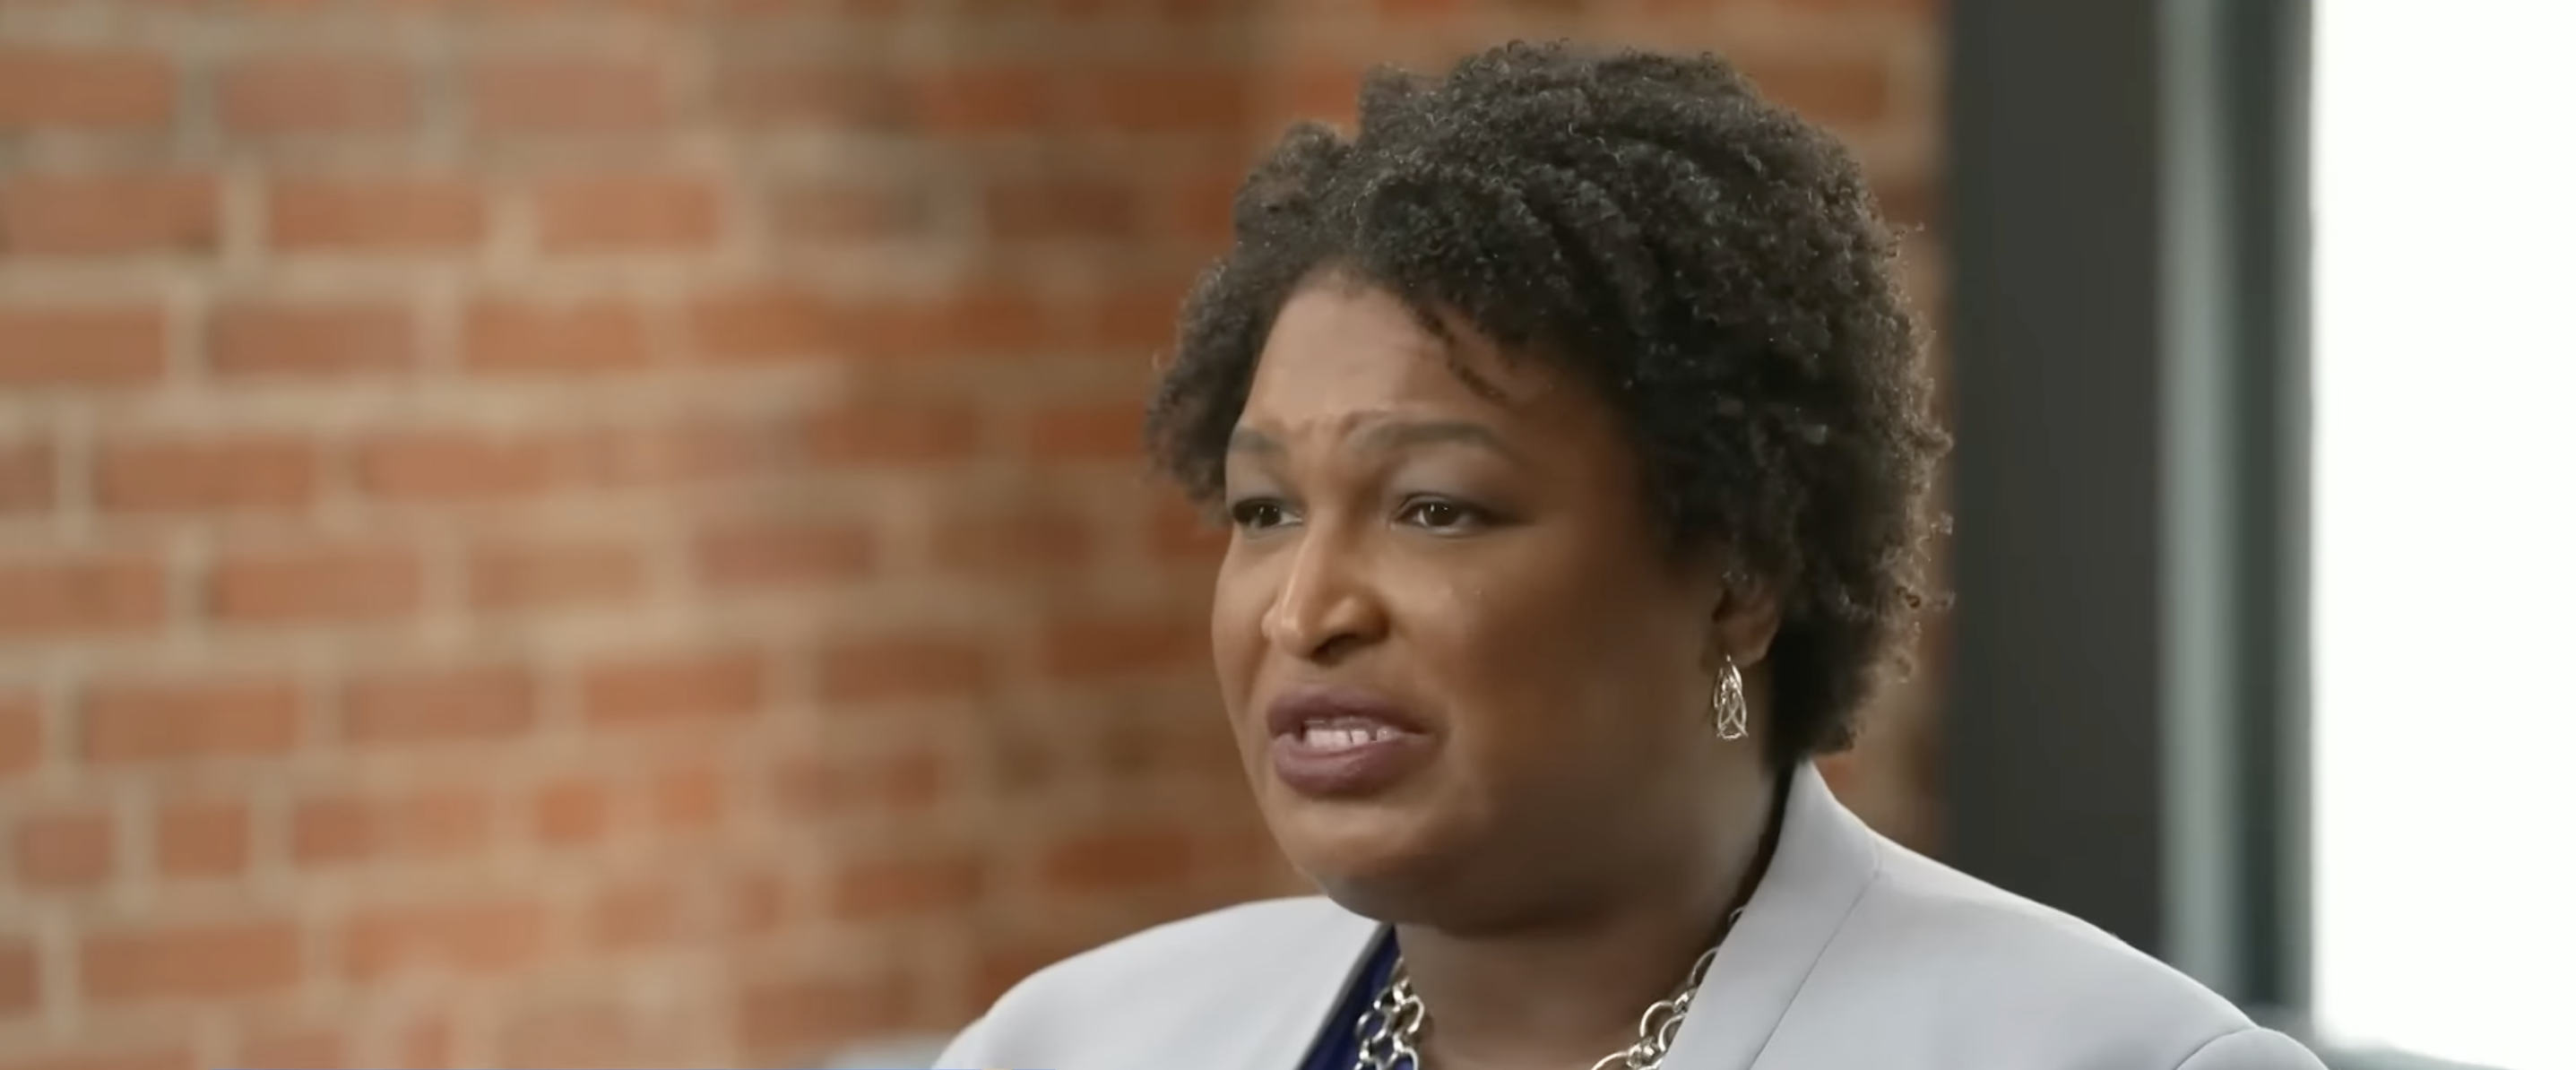 Like Her Political Career, Stacey Abrams’ Election Lawfare Group Is Headed Toward Irrelevance